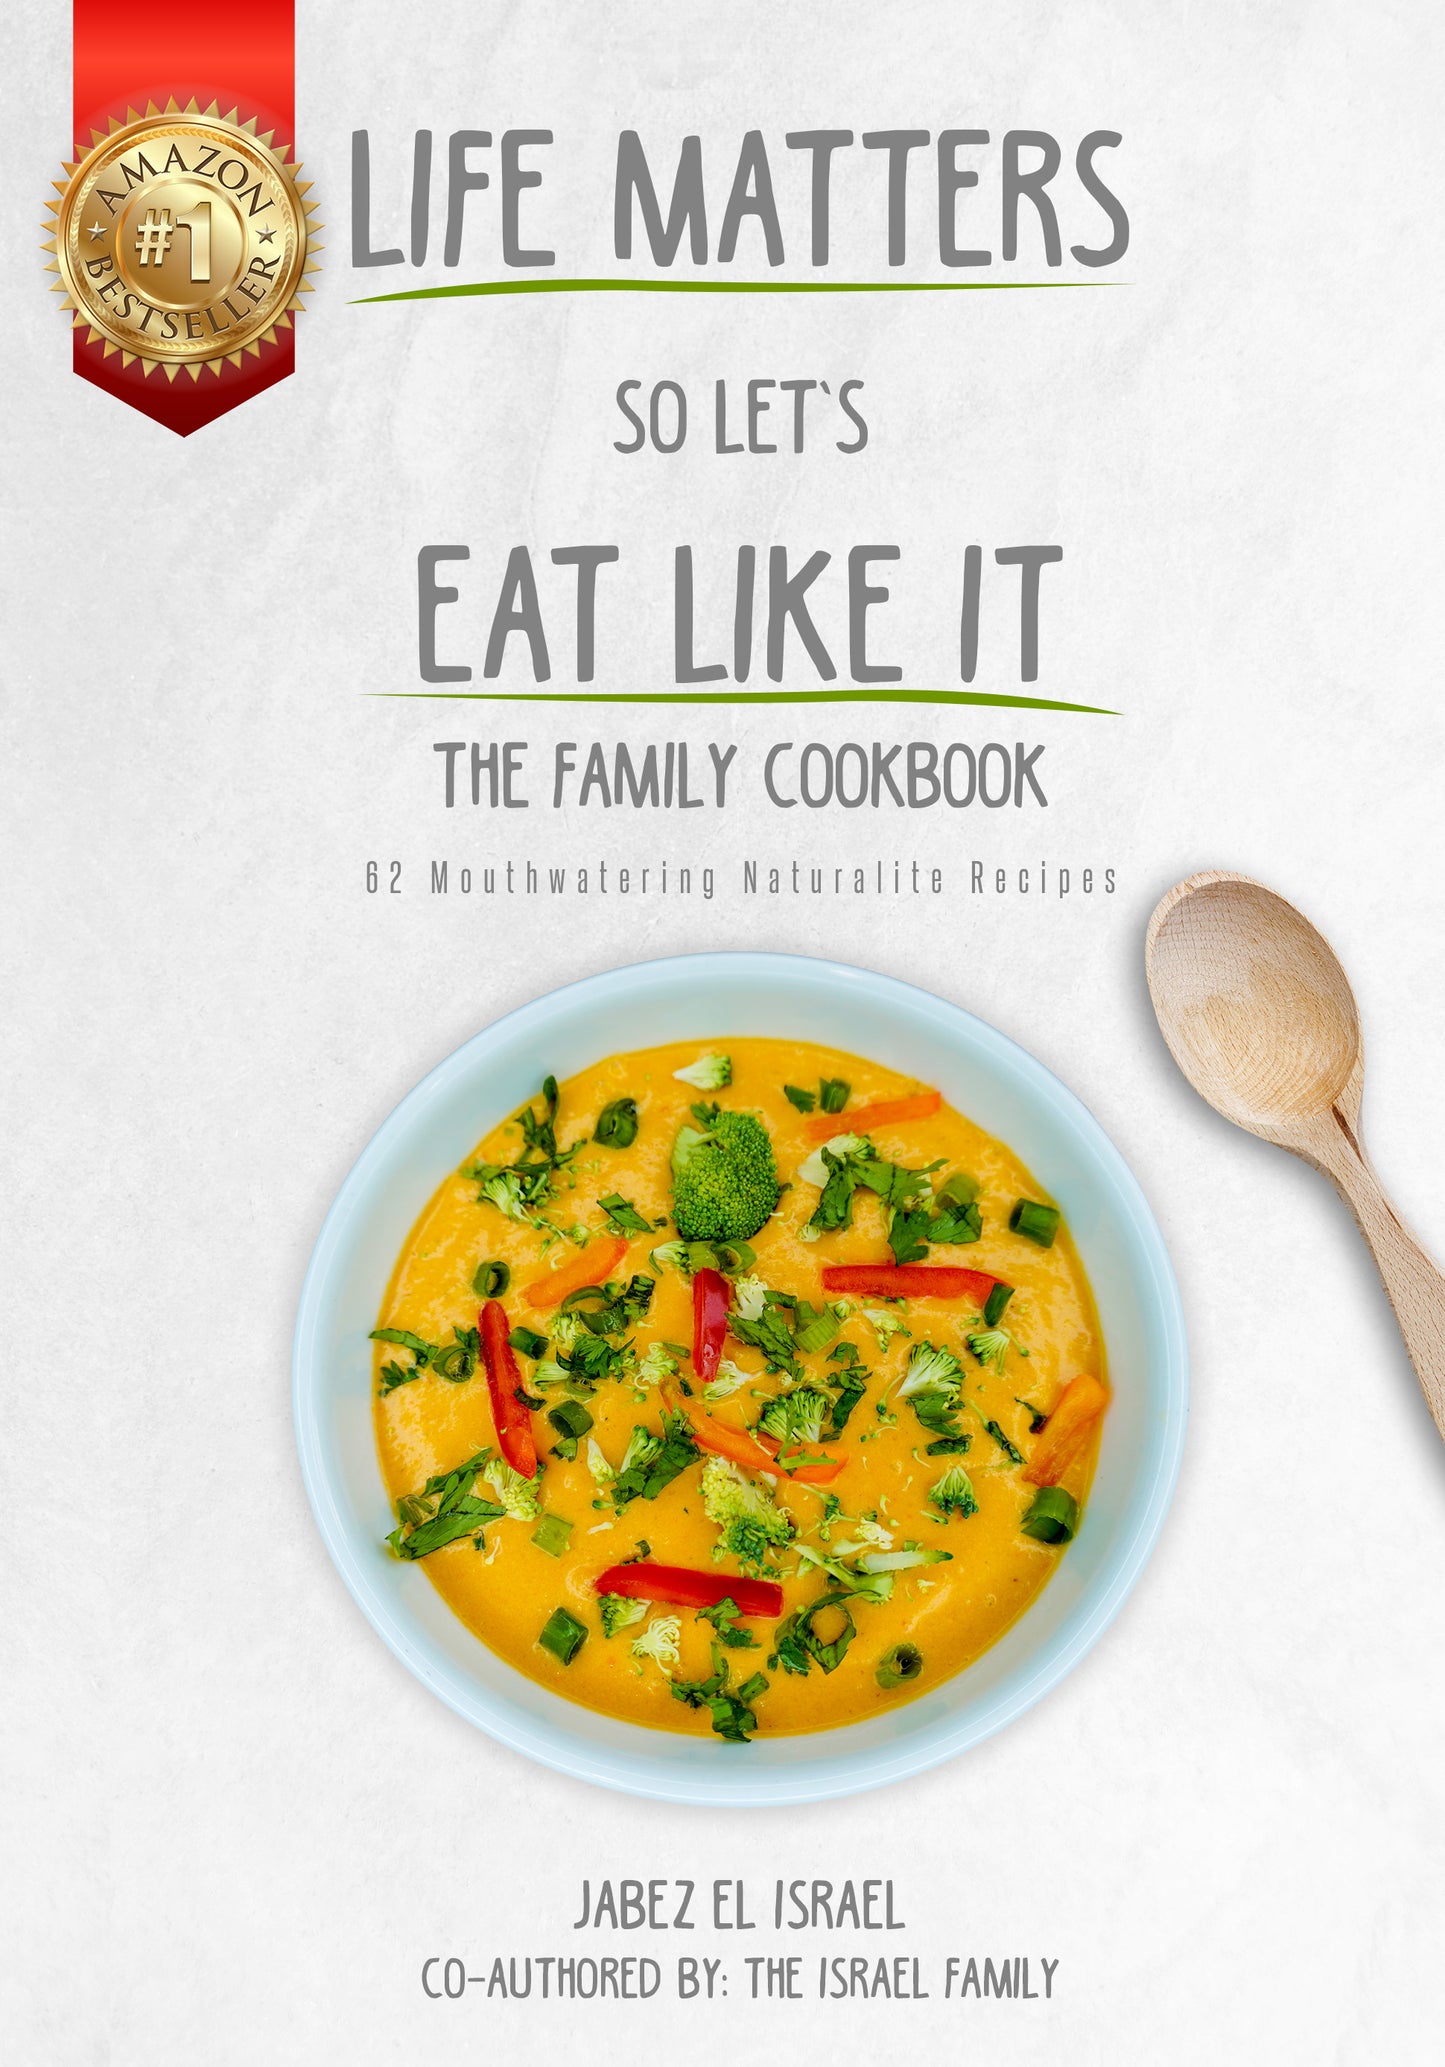 Paperback (THE FAMILY COOKBOOK)